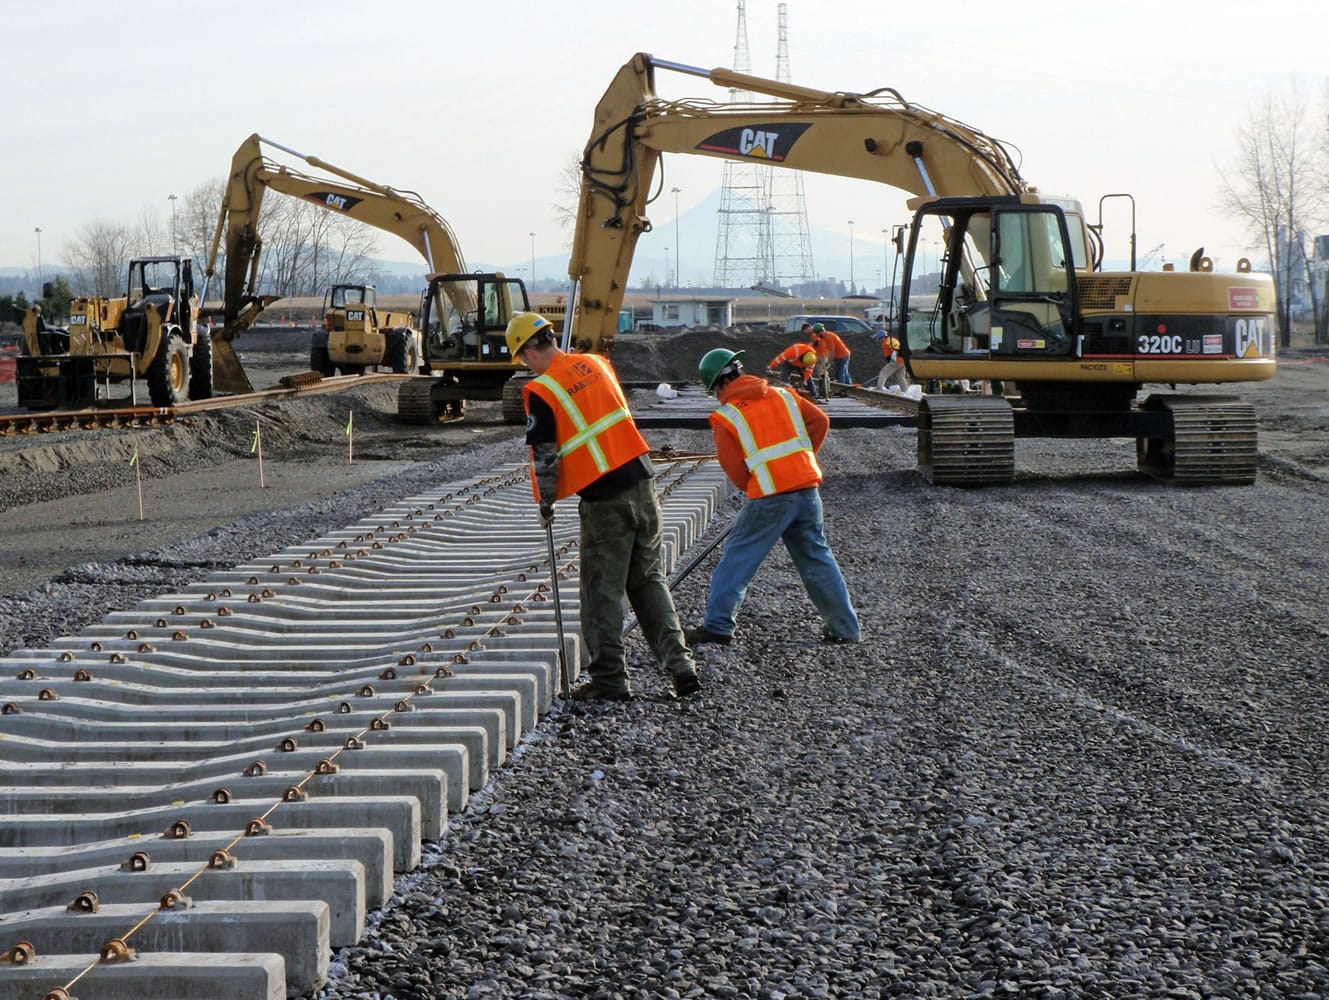 The Port of Vancouver completed its Terminal 5 train improvements, adding 35,000 feet of rail capacity, in July 2010. The extension is part of the port?s larger West Vancouver Freight Access project.